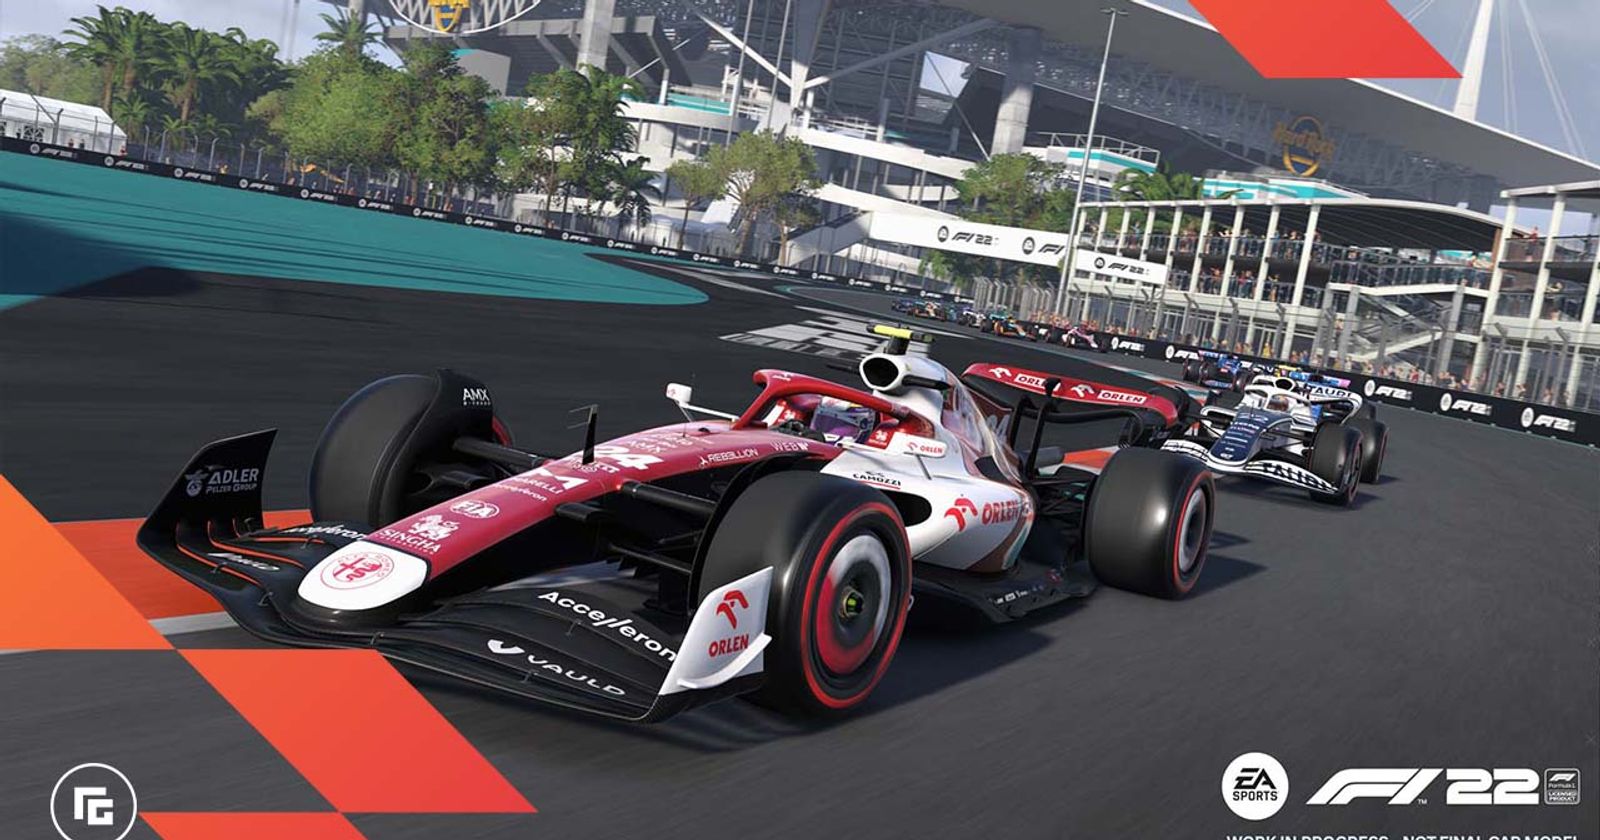 CROSSPLAY FOR LEAGUES CONFIRMED IN F123 LETS GOOO!!! Also they are taking  action to prevent pay to win in F1 World!? This doesn't sound like EA at  all I am pleasantly surprised.